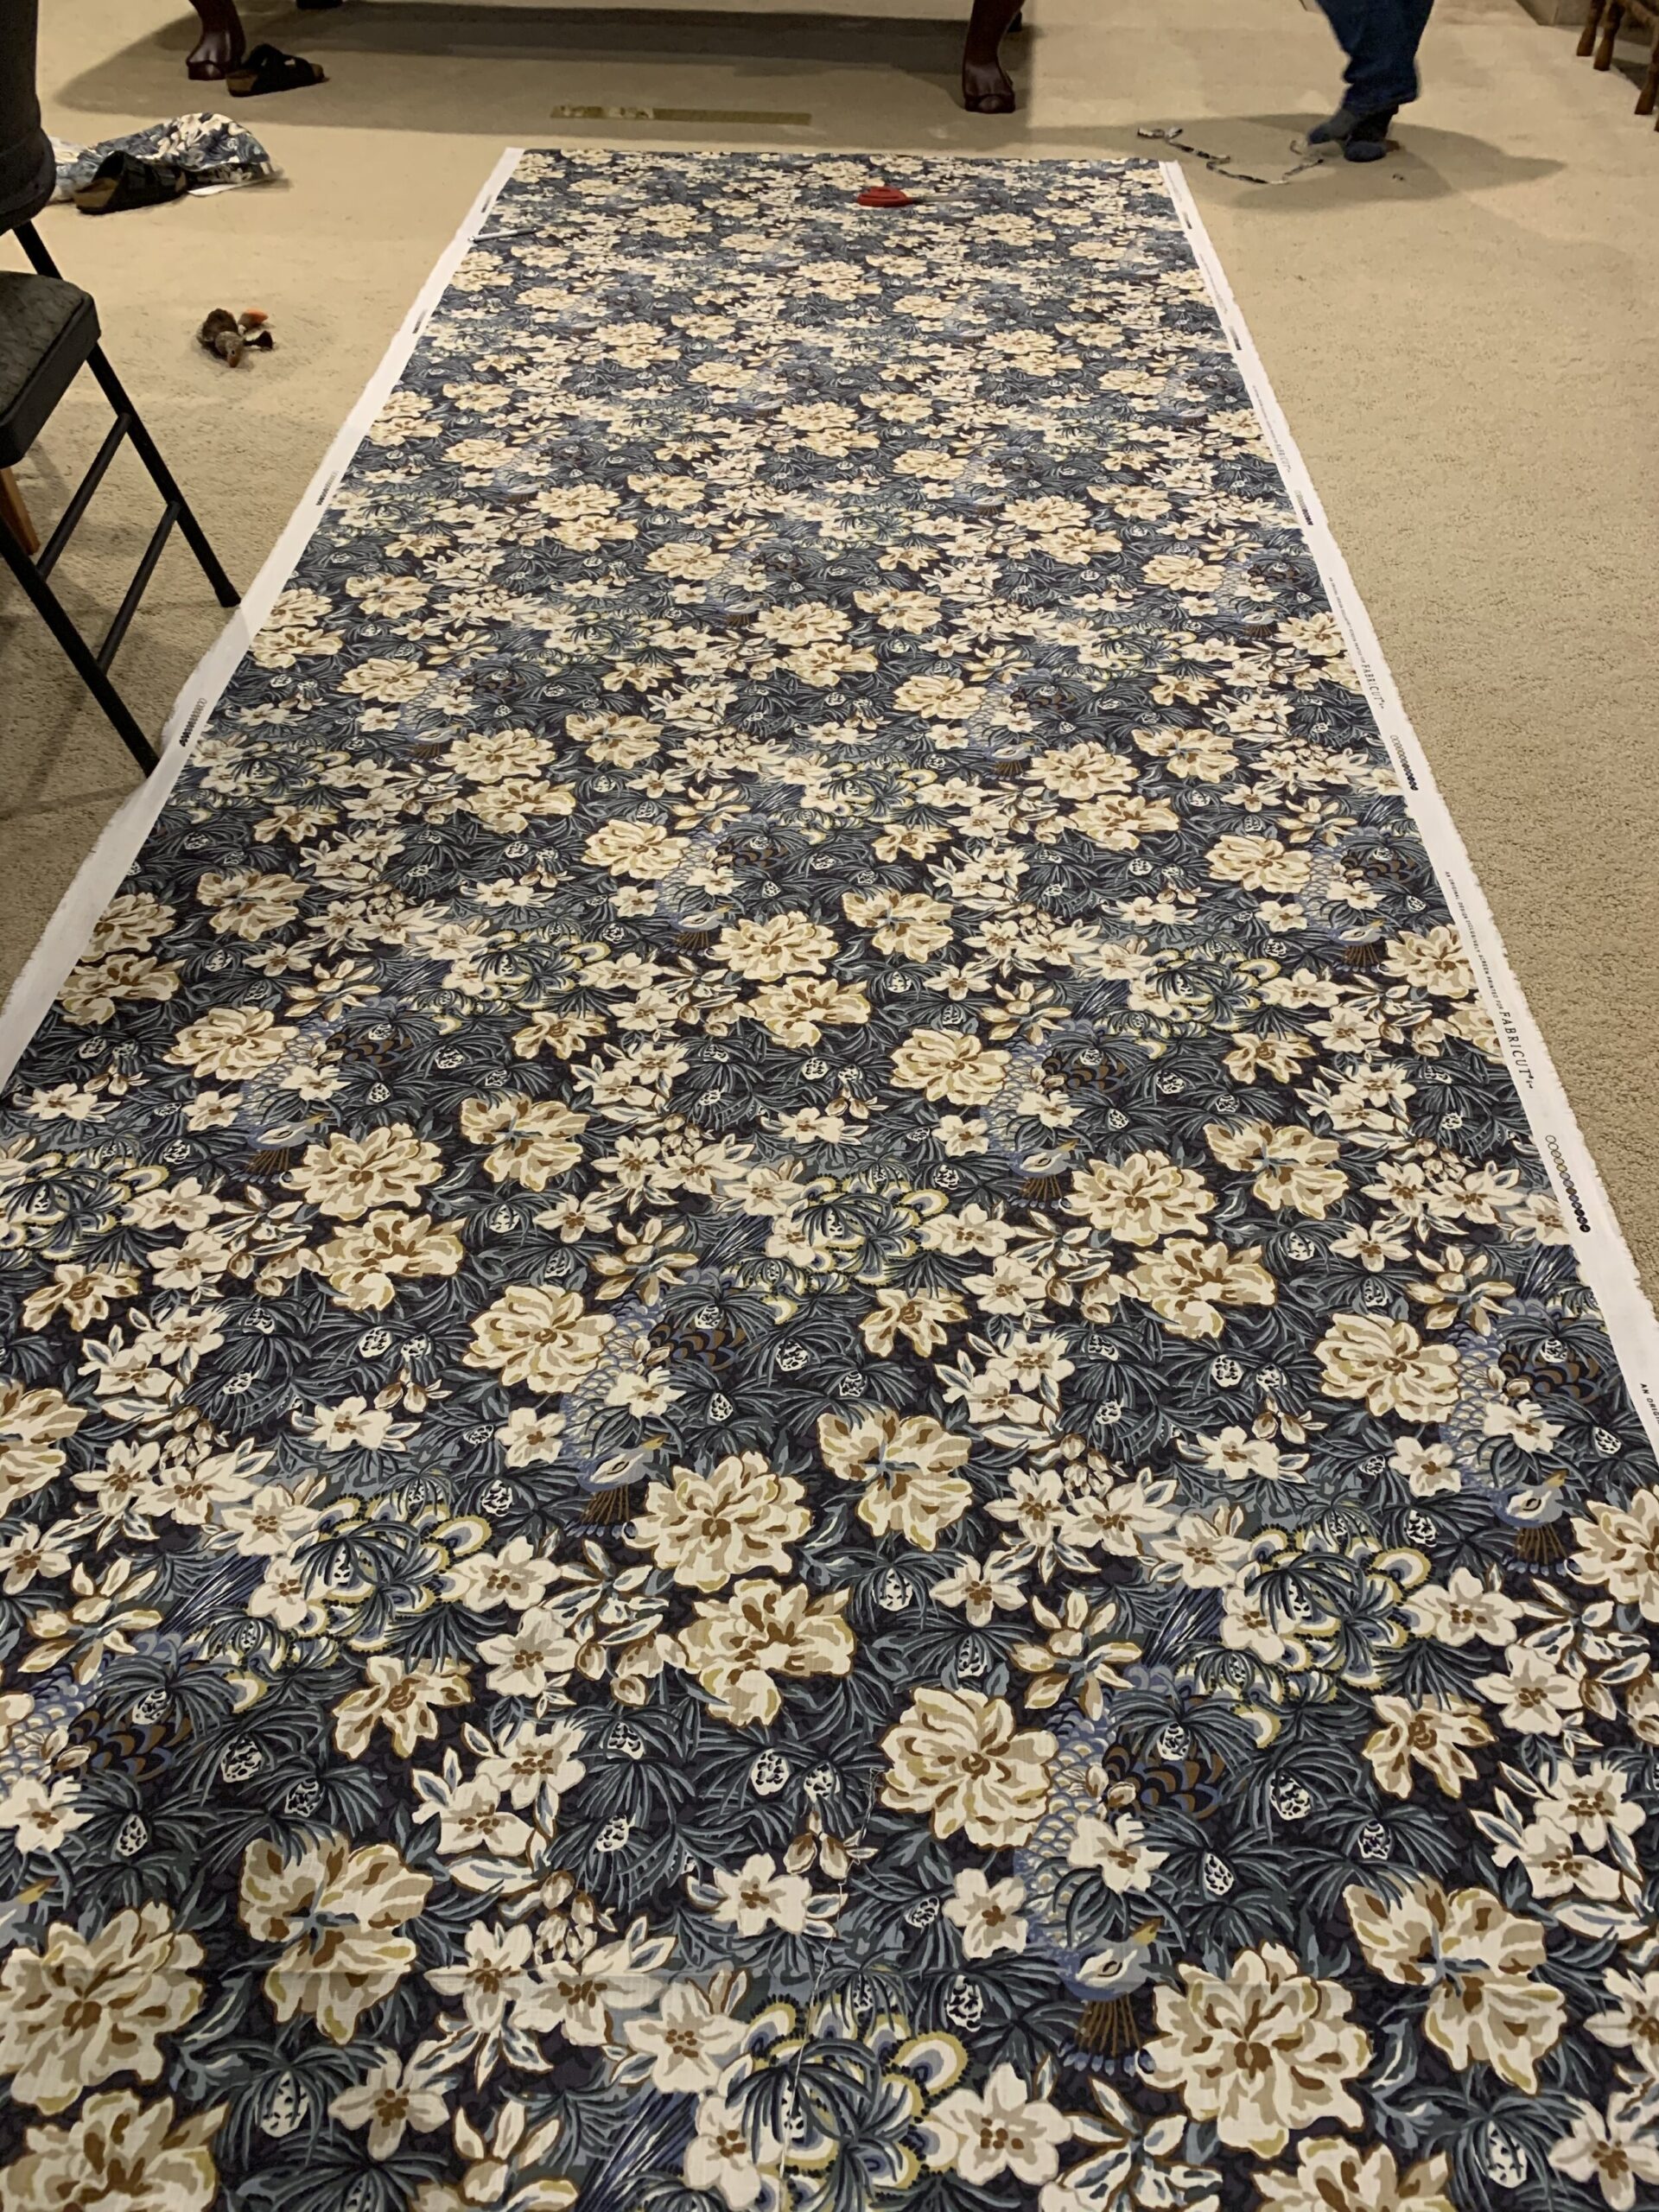 blue floral fabric layed out on the floor